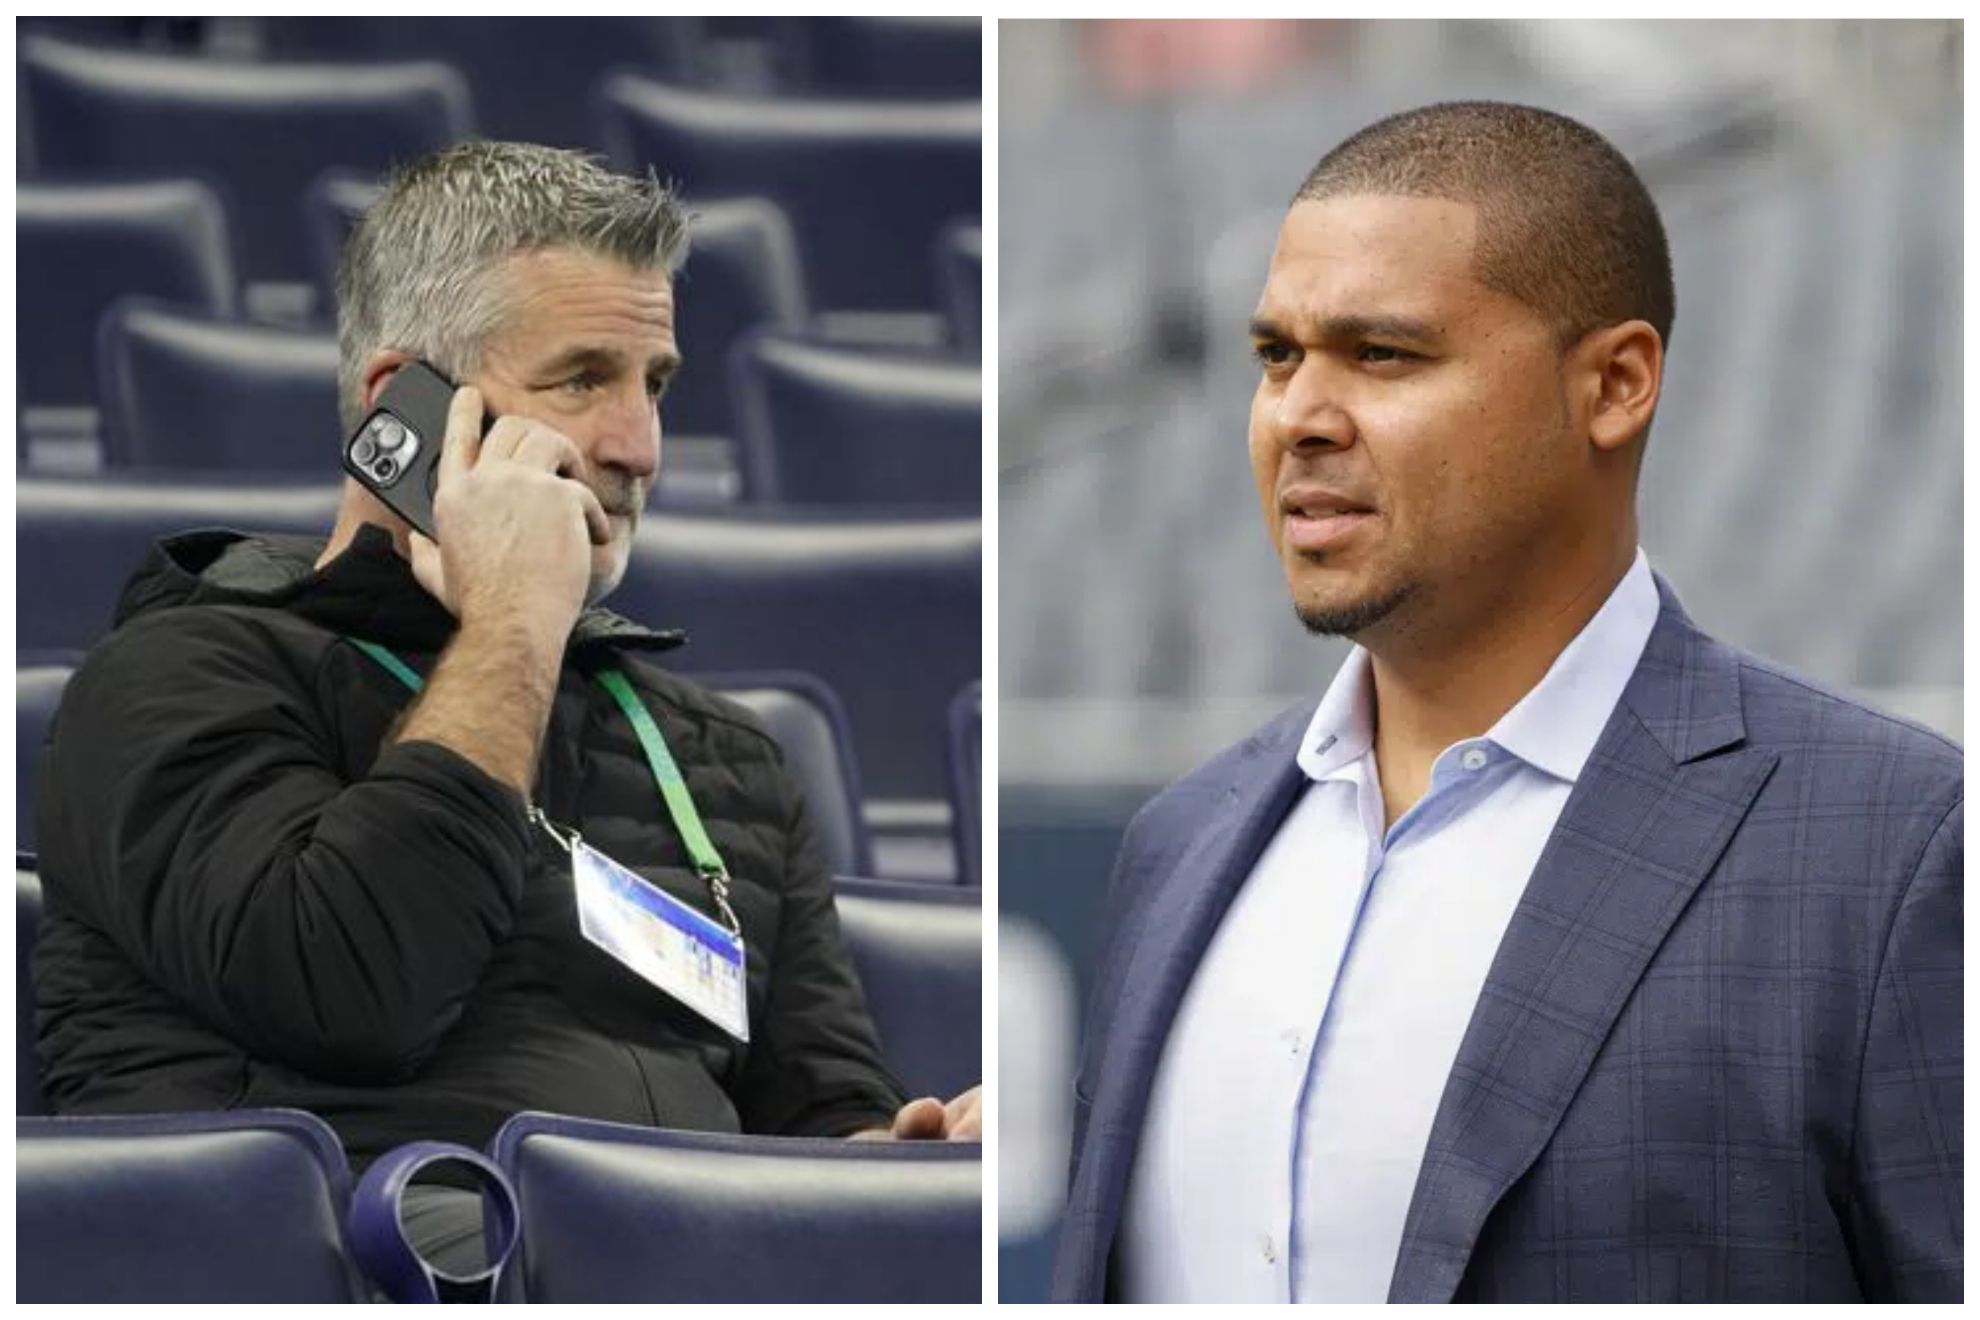 Frank Reich is the new head coach of the Carolina Panthers, Ryan Poles is the Chicago Bears general manager.